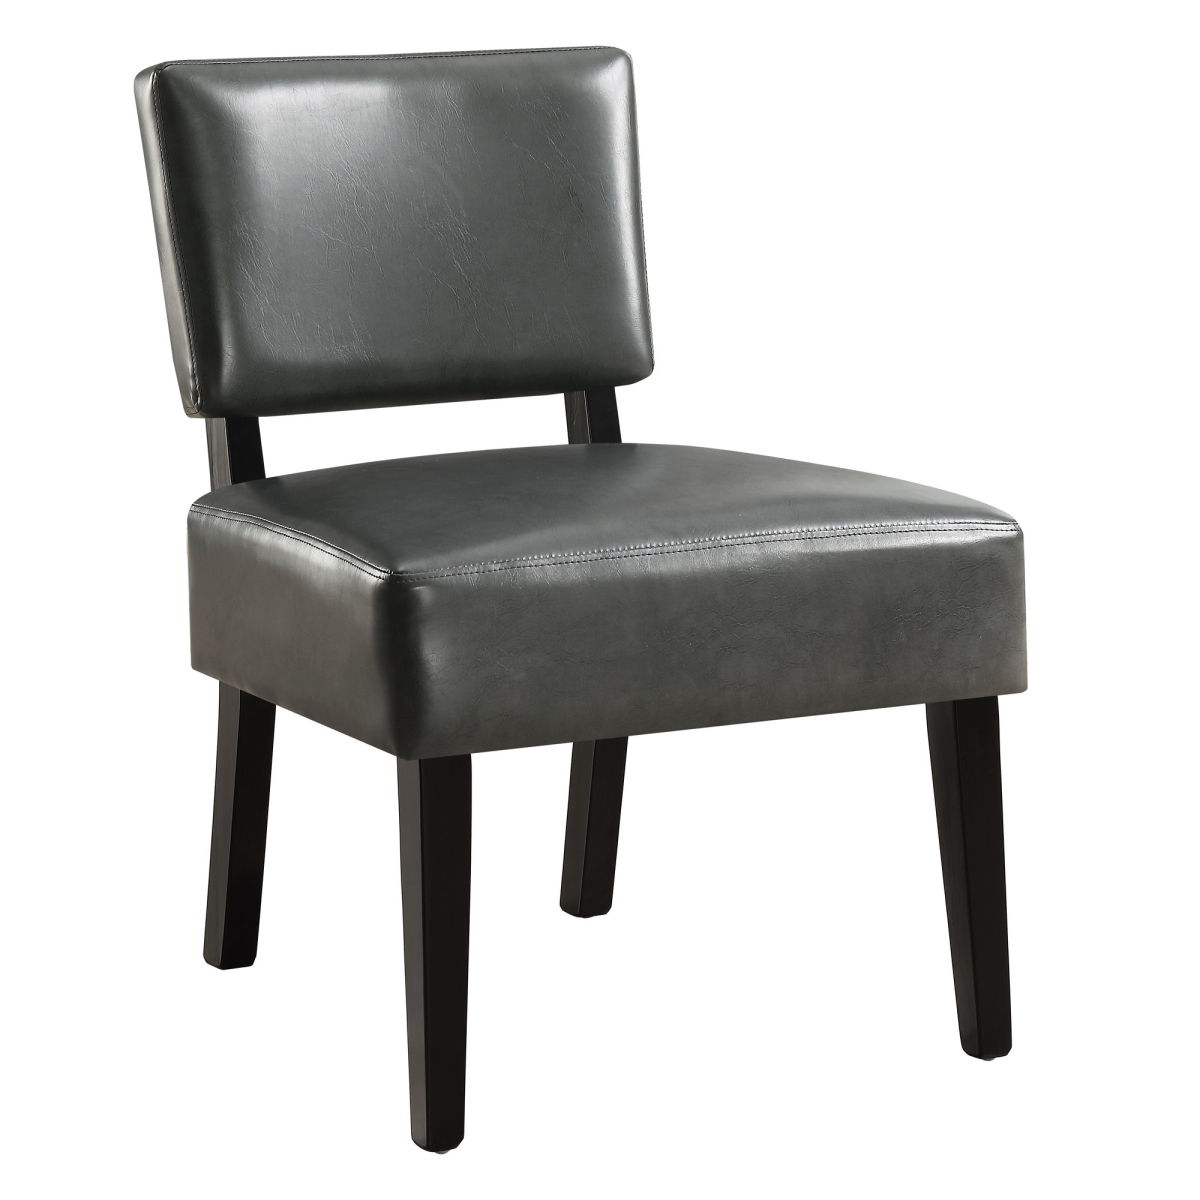 Accent Chair, Charcoal Grey Leather, Look Fabric